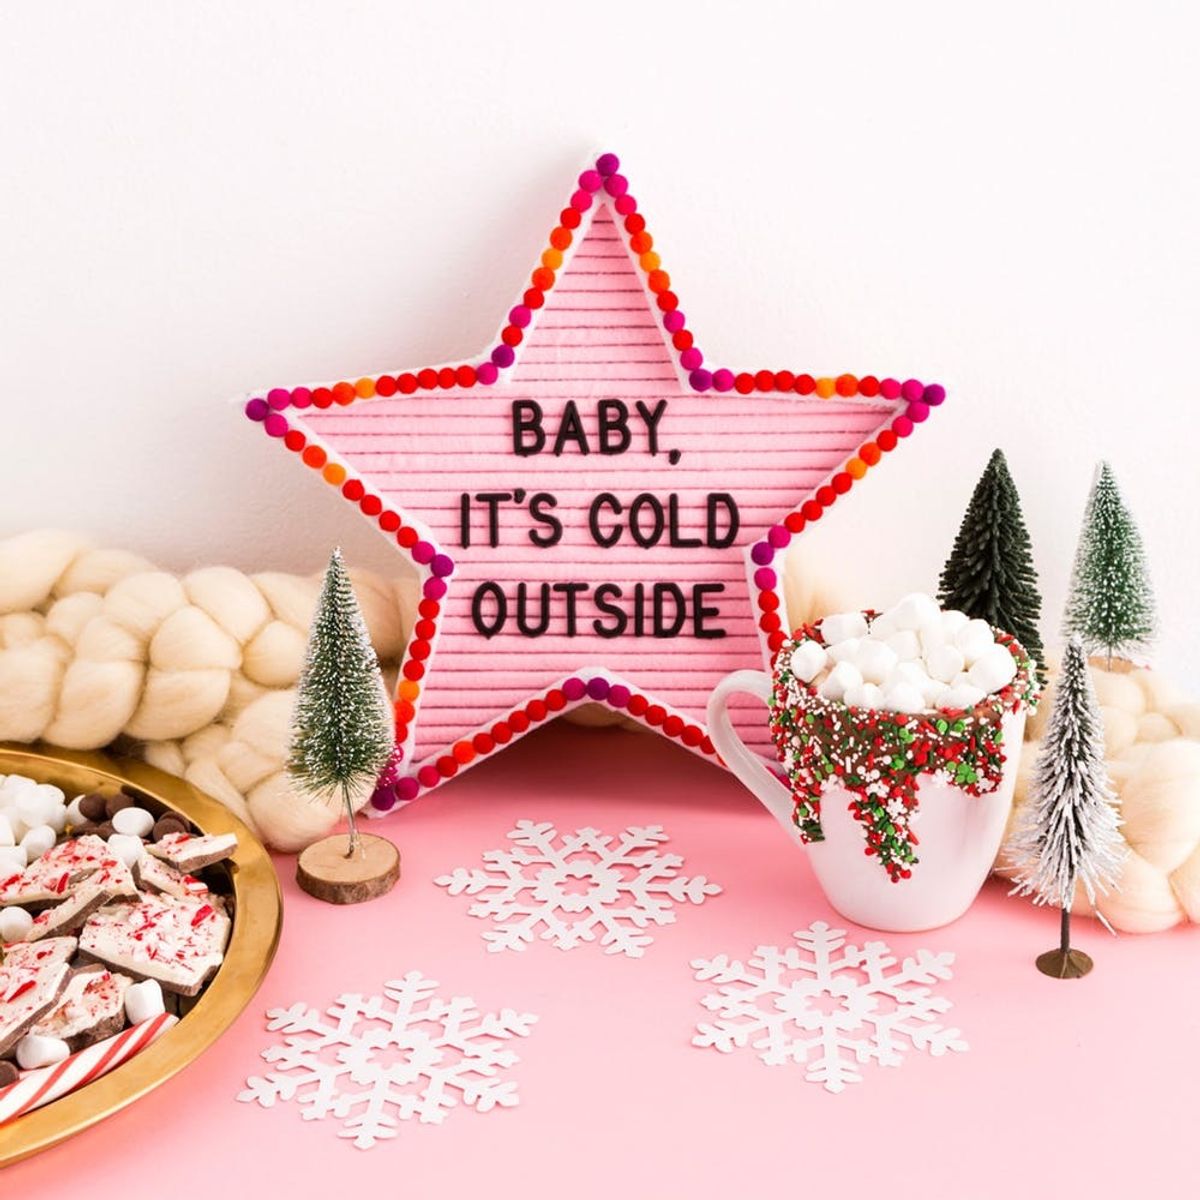 Shine Bright This Season With a Star-Shaped Letter Board DIY